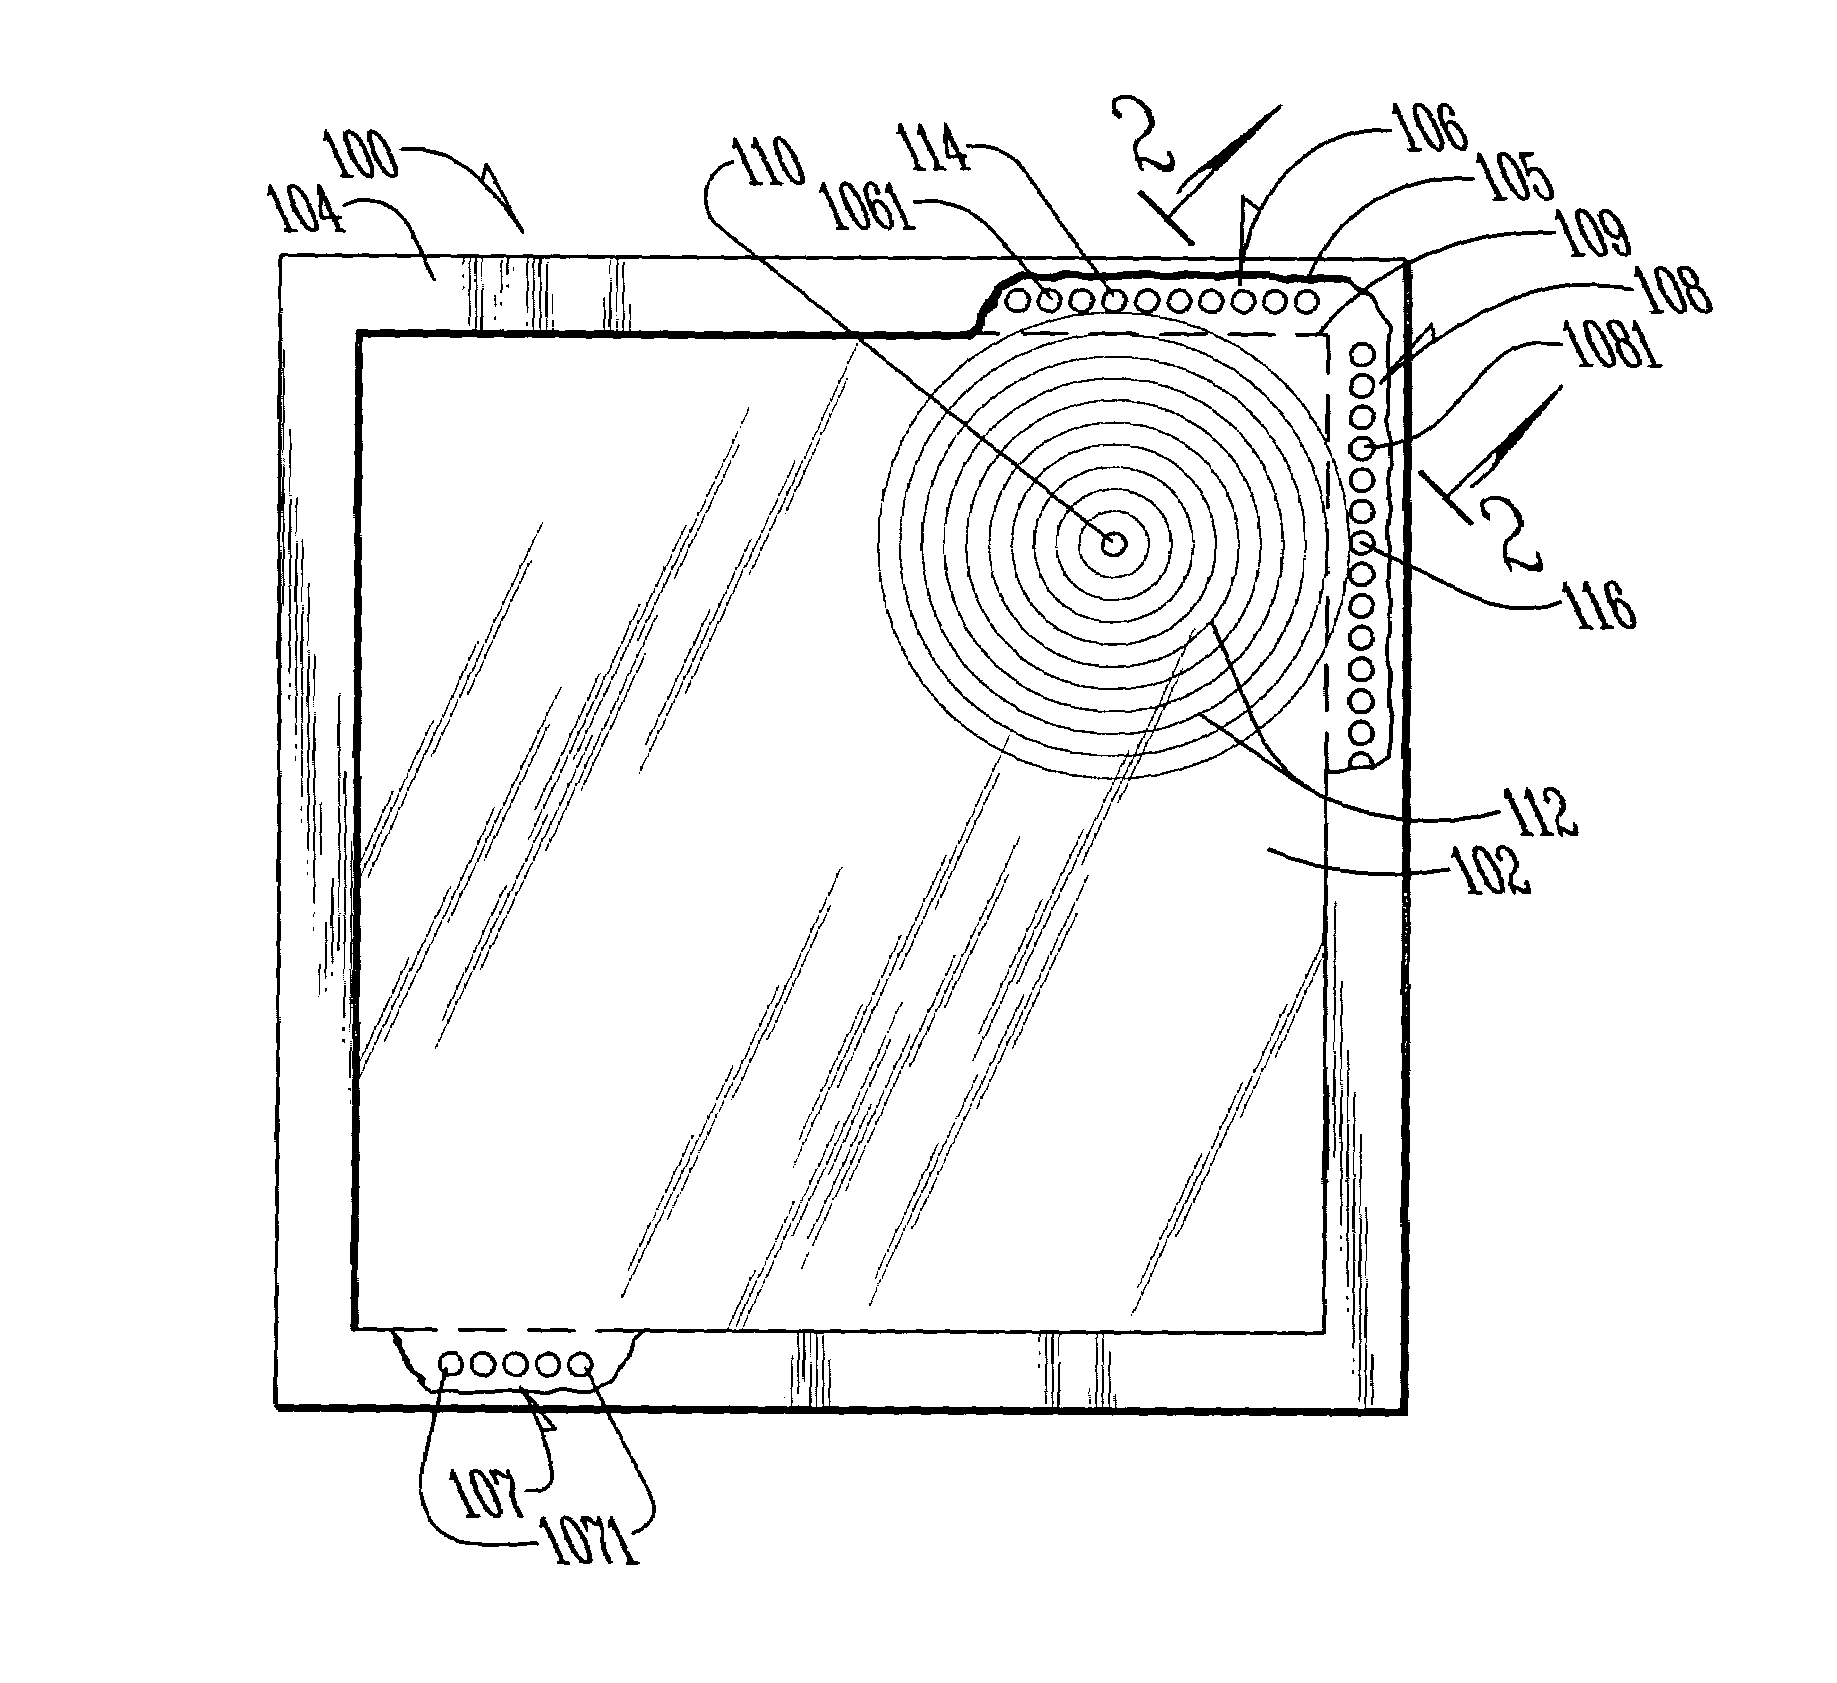 Method and apparatus for data entry for a liquid crystal display